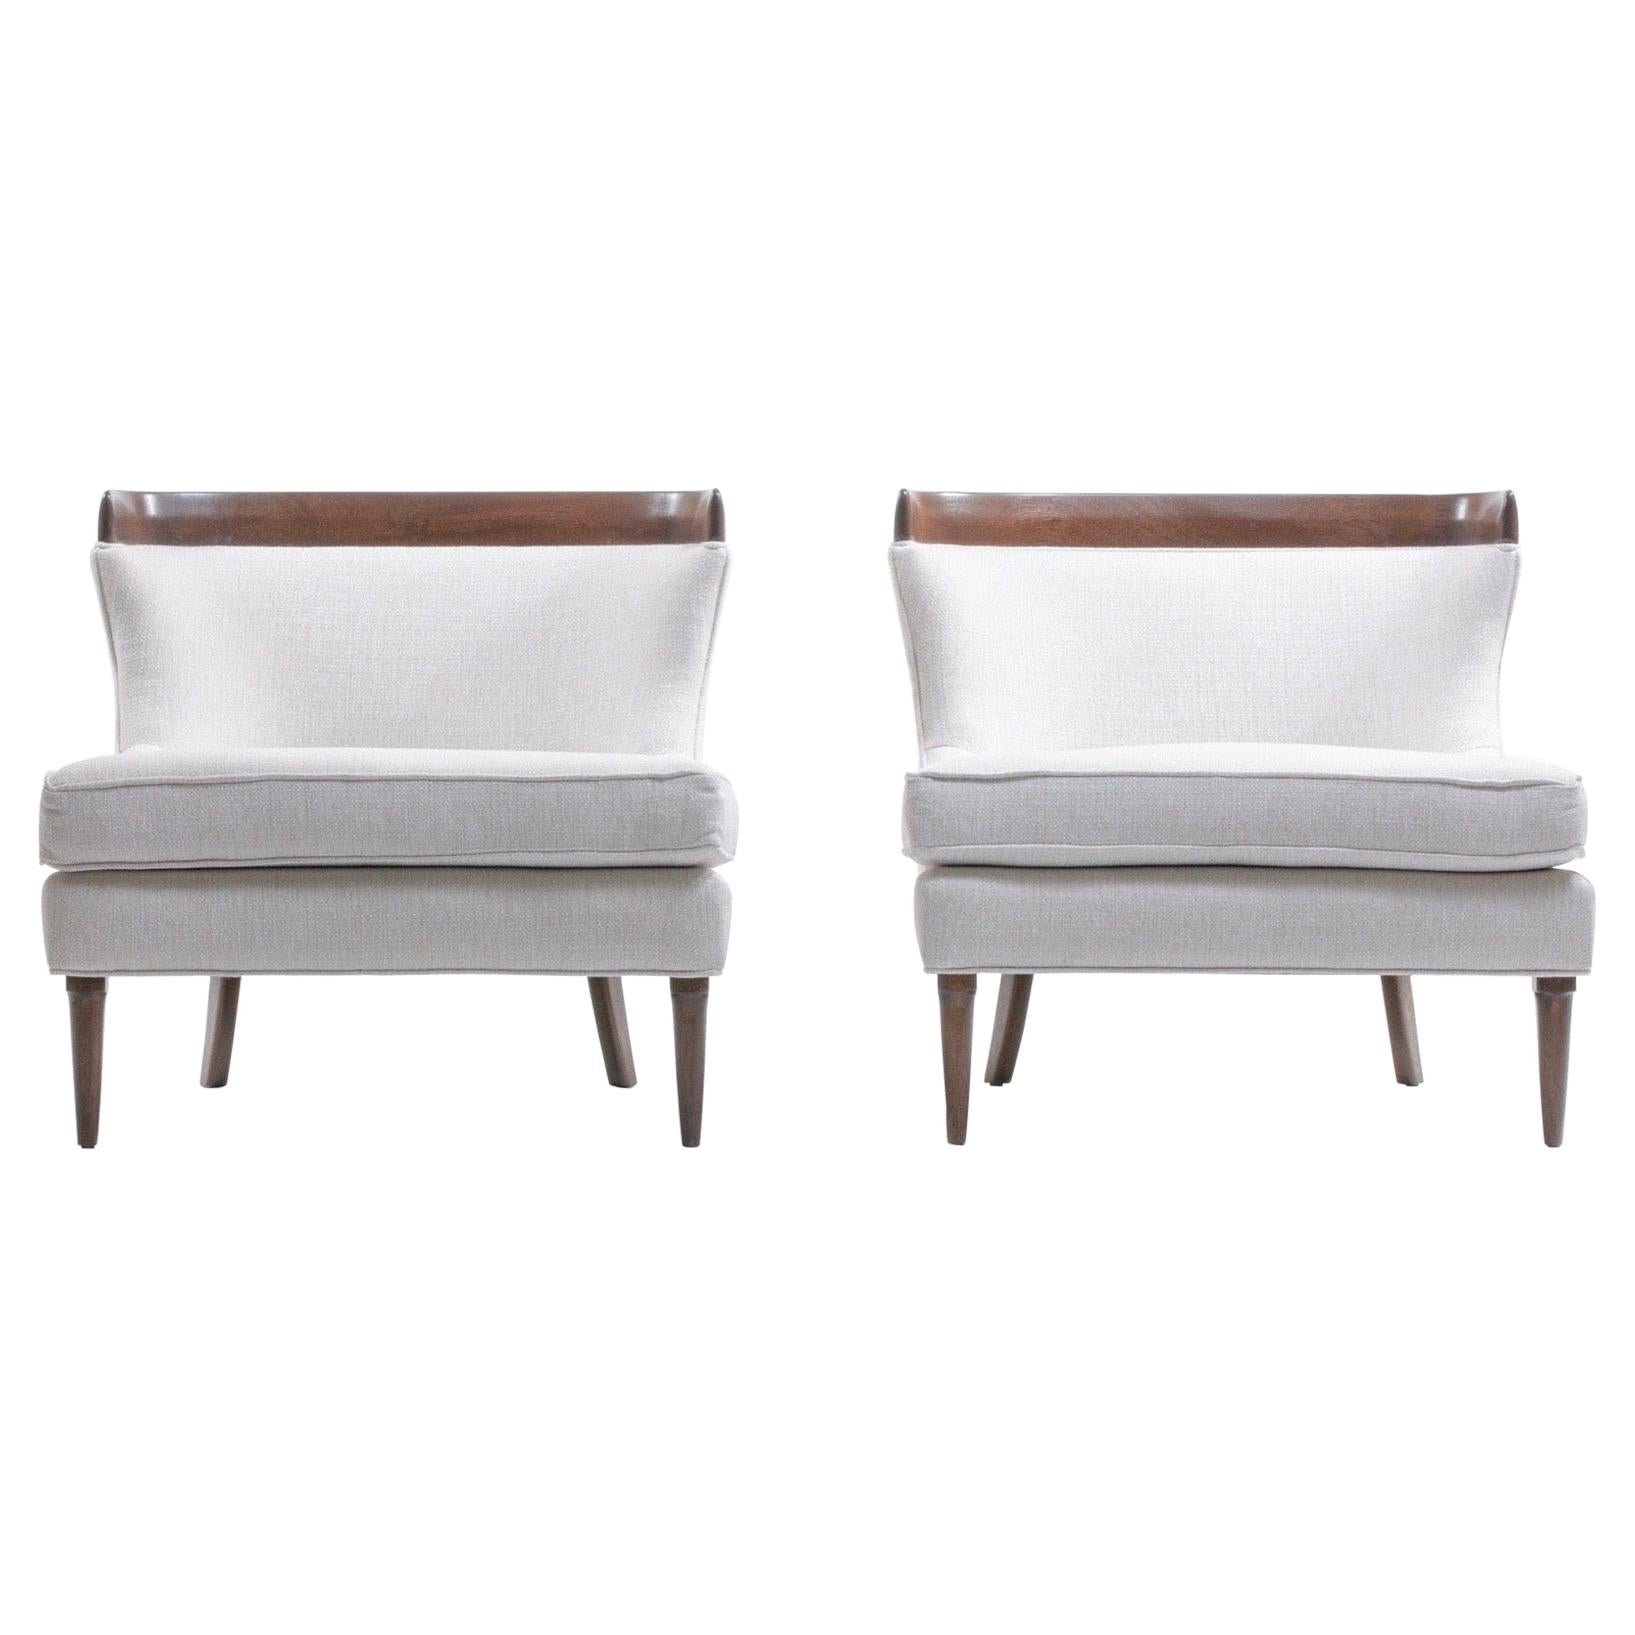 Pair of Tomlinson Sophisticate Slipper Chairs in Walnut with Ivory Woven Fabric